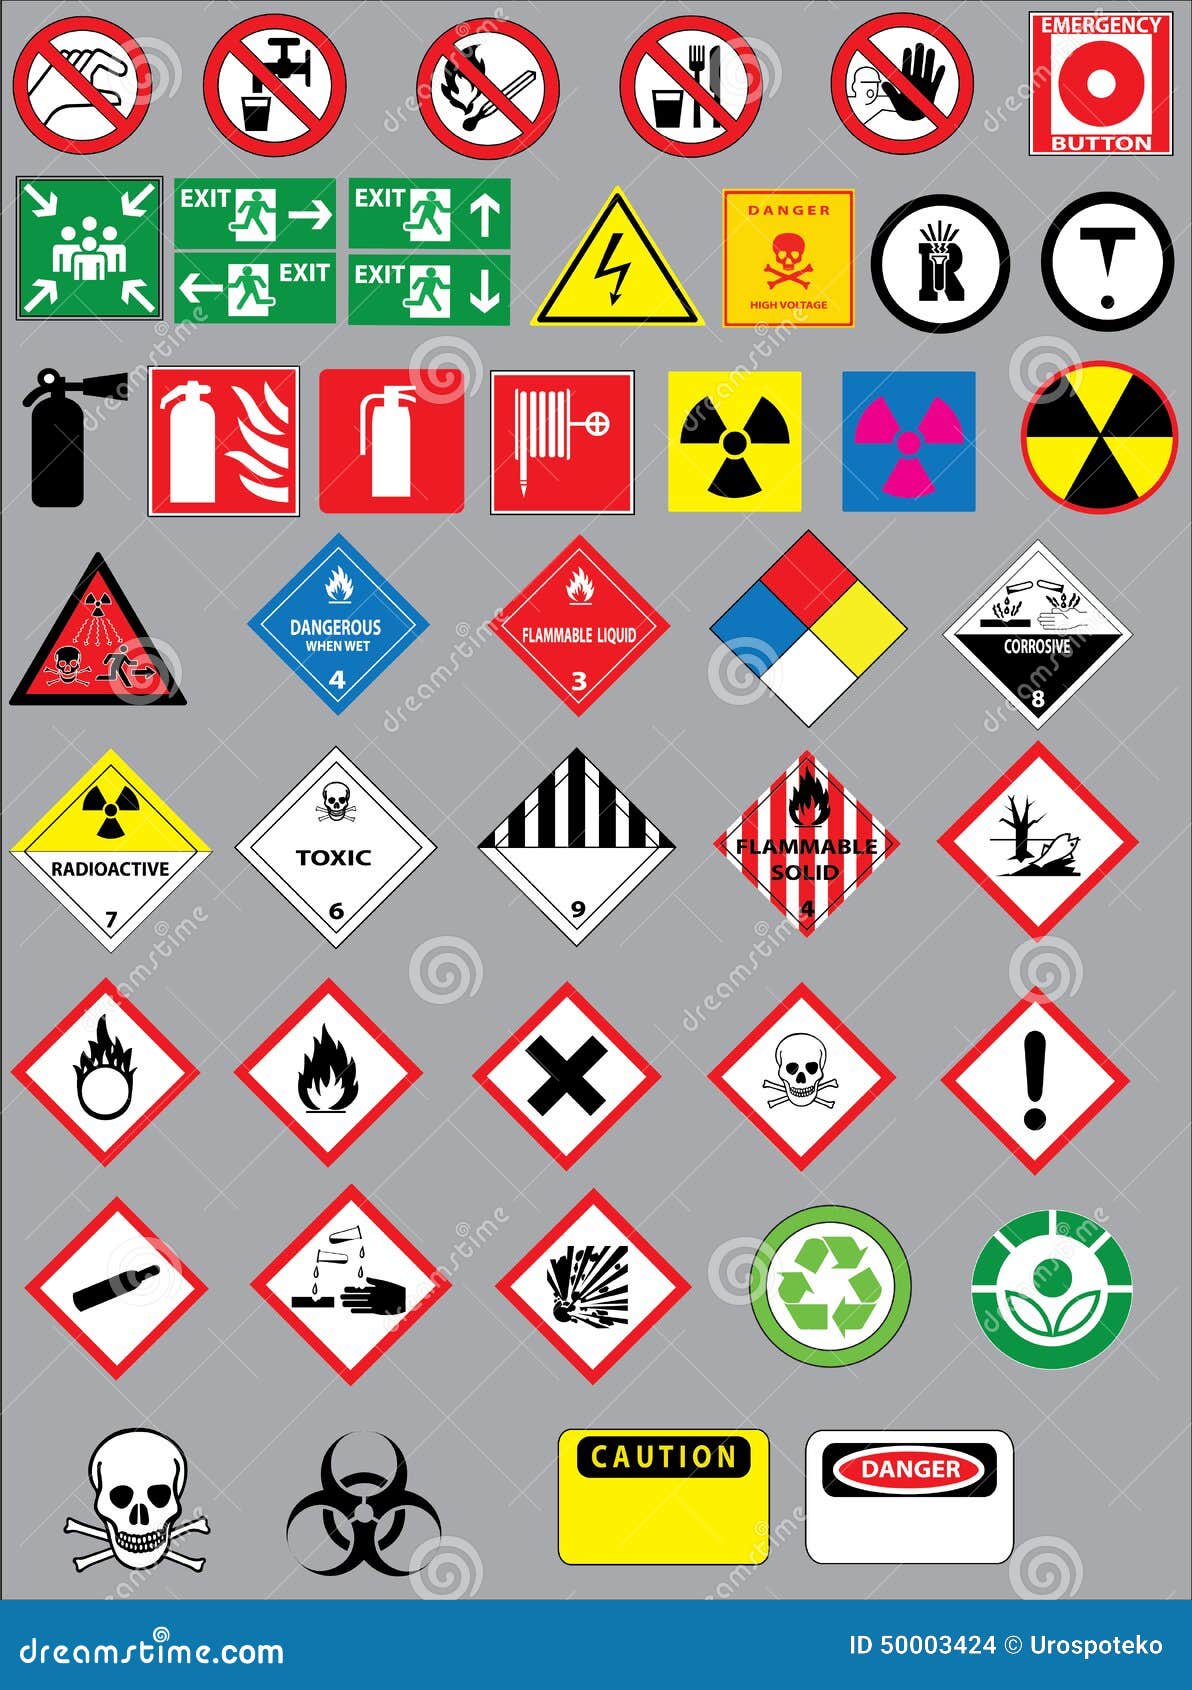 Laboratory Safety Signs Stock Illustrations 326 Laboratory Safety Signs Stock Illustrations Vectors Clipart Dreamstime